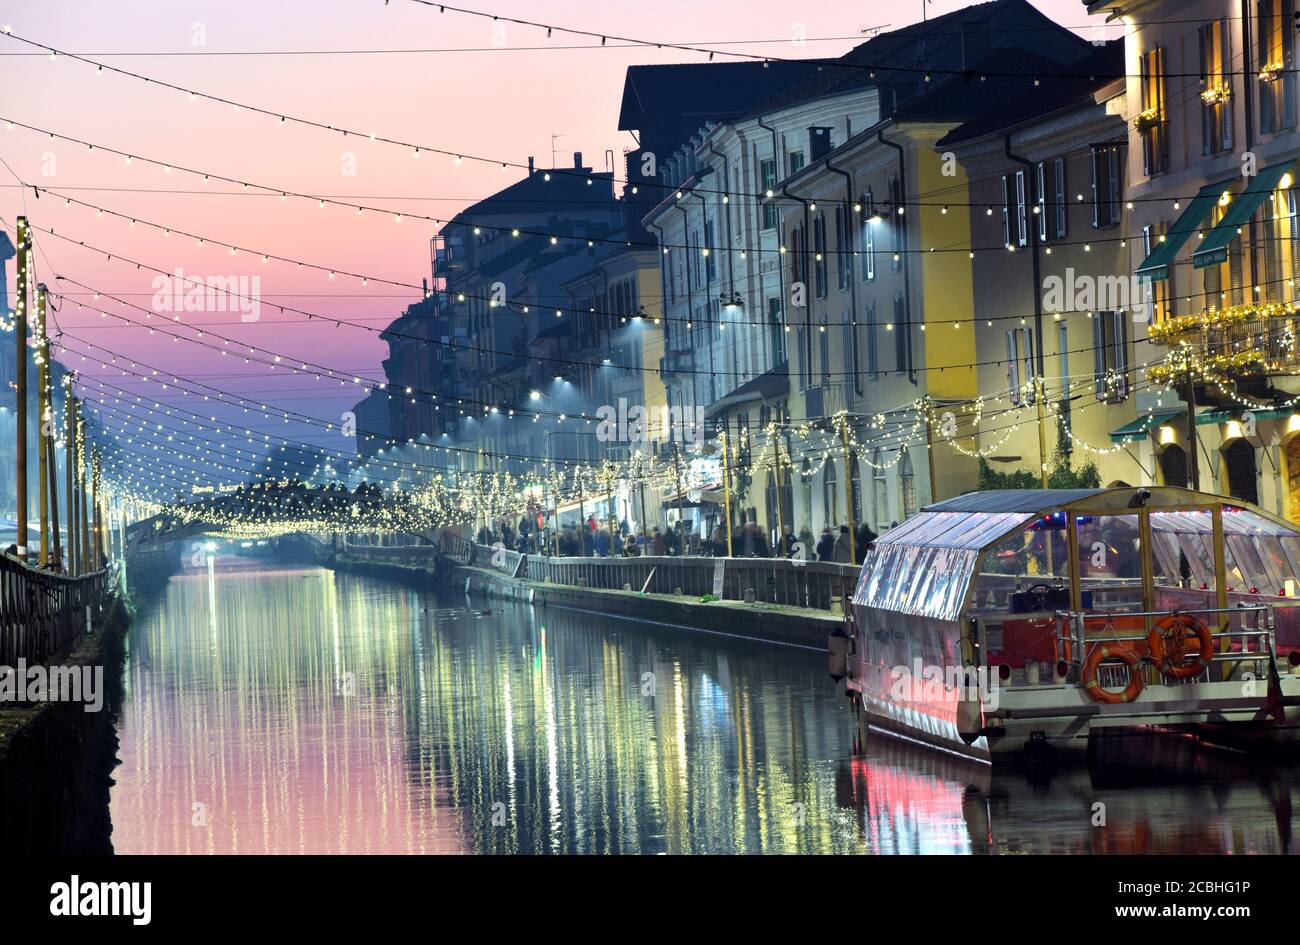 Scene at dusk  by the Canal in Milan, Italy Stock Photo